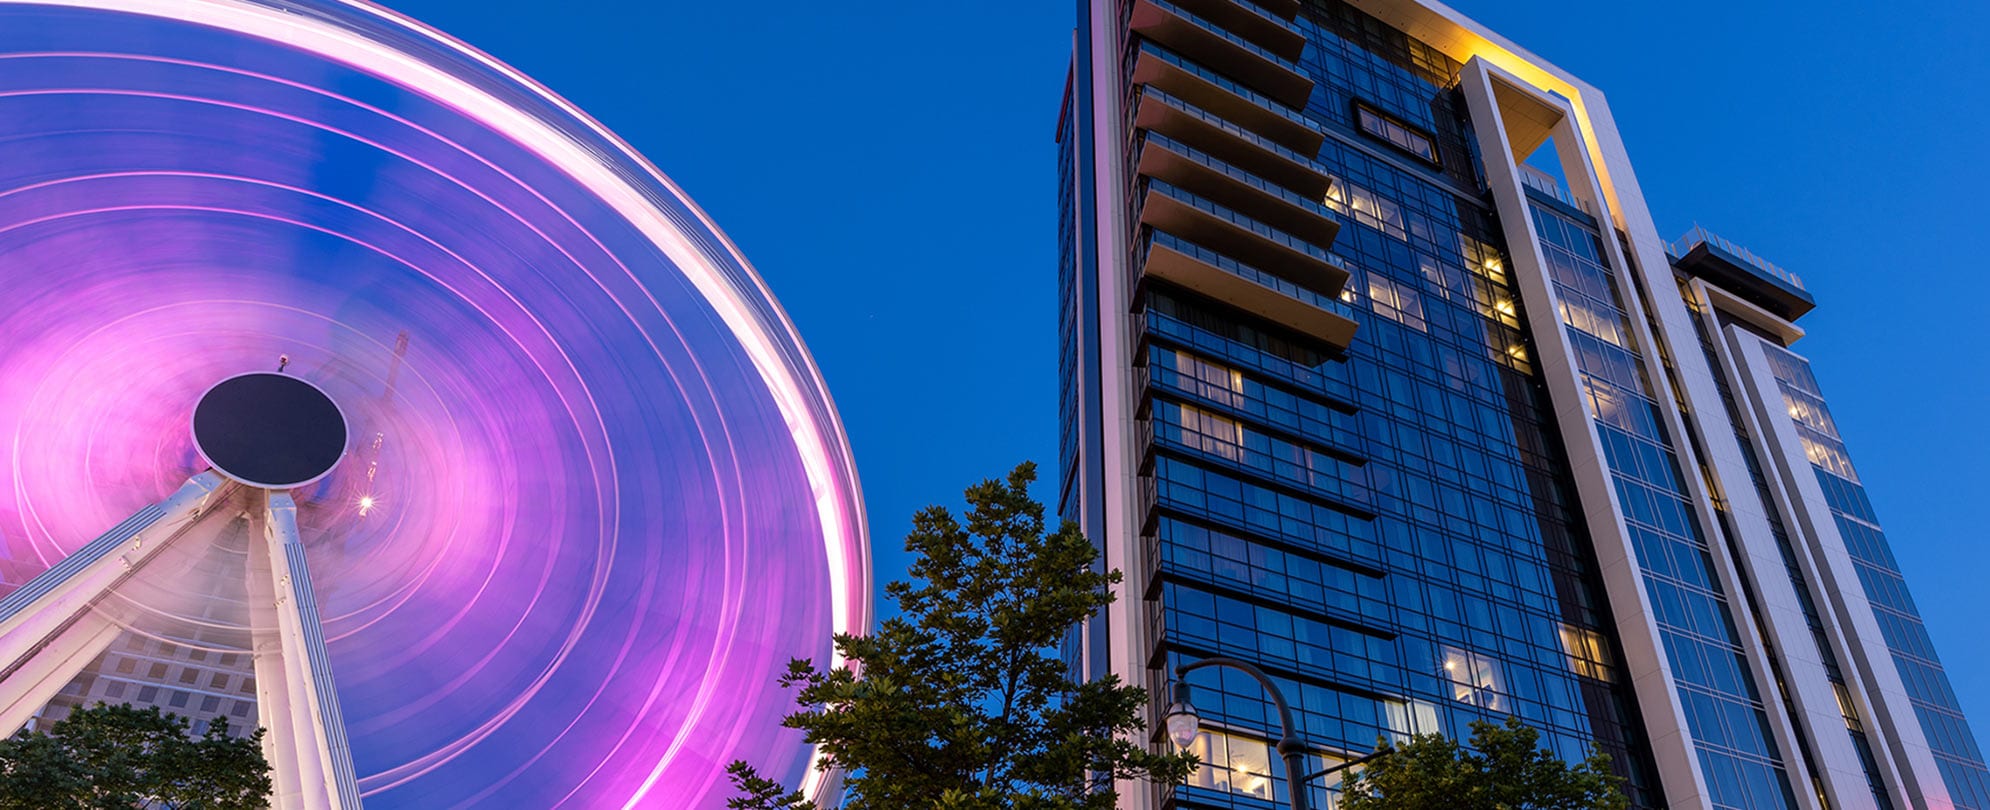 A new, high-rise Wyndham Destinations timeshare resort in Atlanta, GA and the Atlanta Ferris wheel shown from the ground.